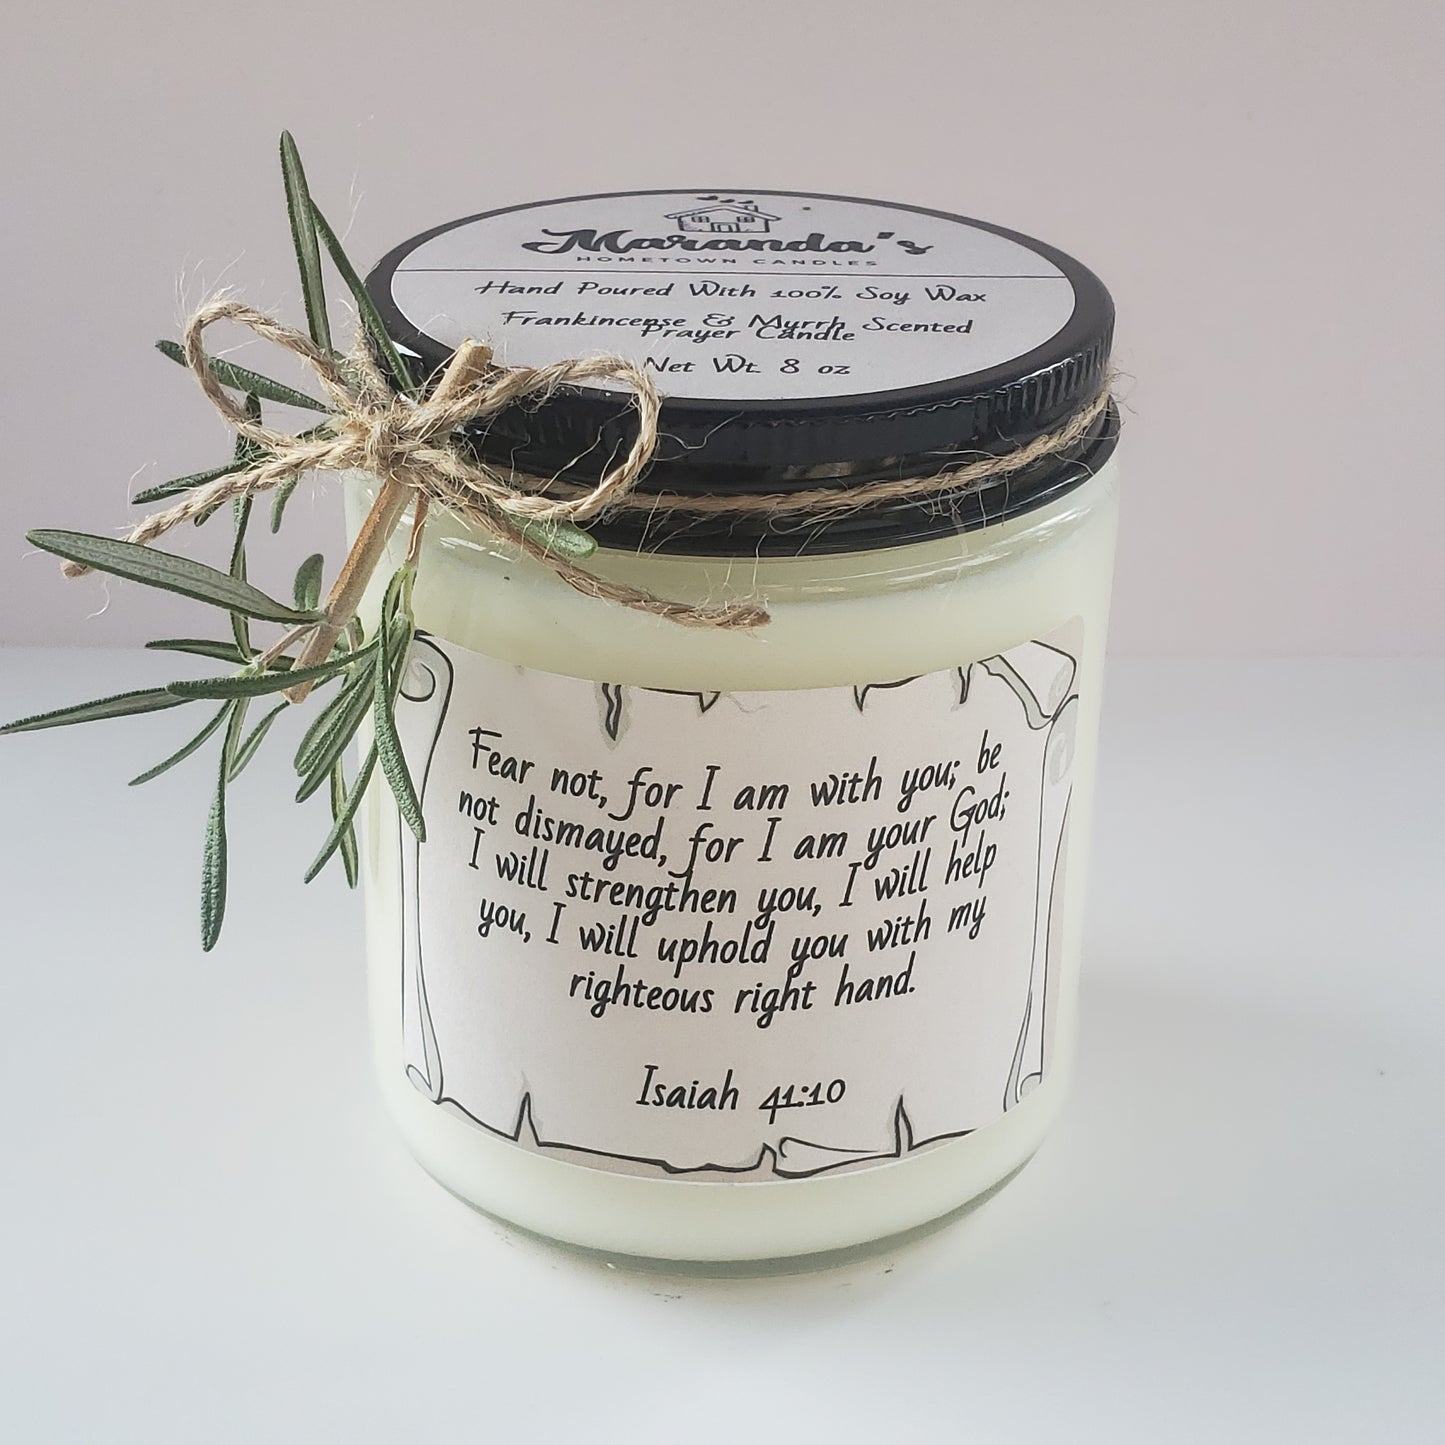 100% Soy Wax Prayer Candles With Scripture